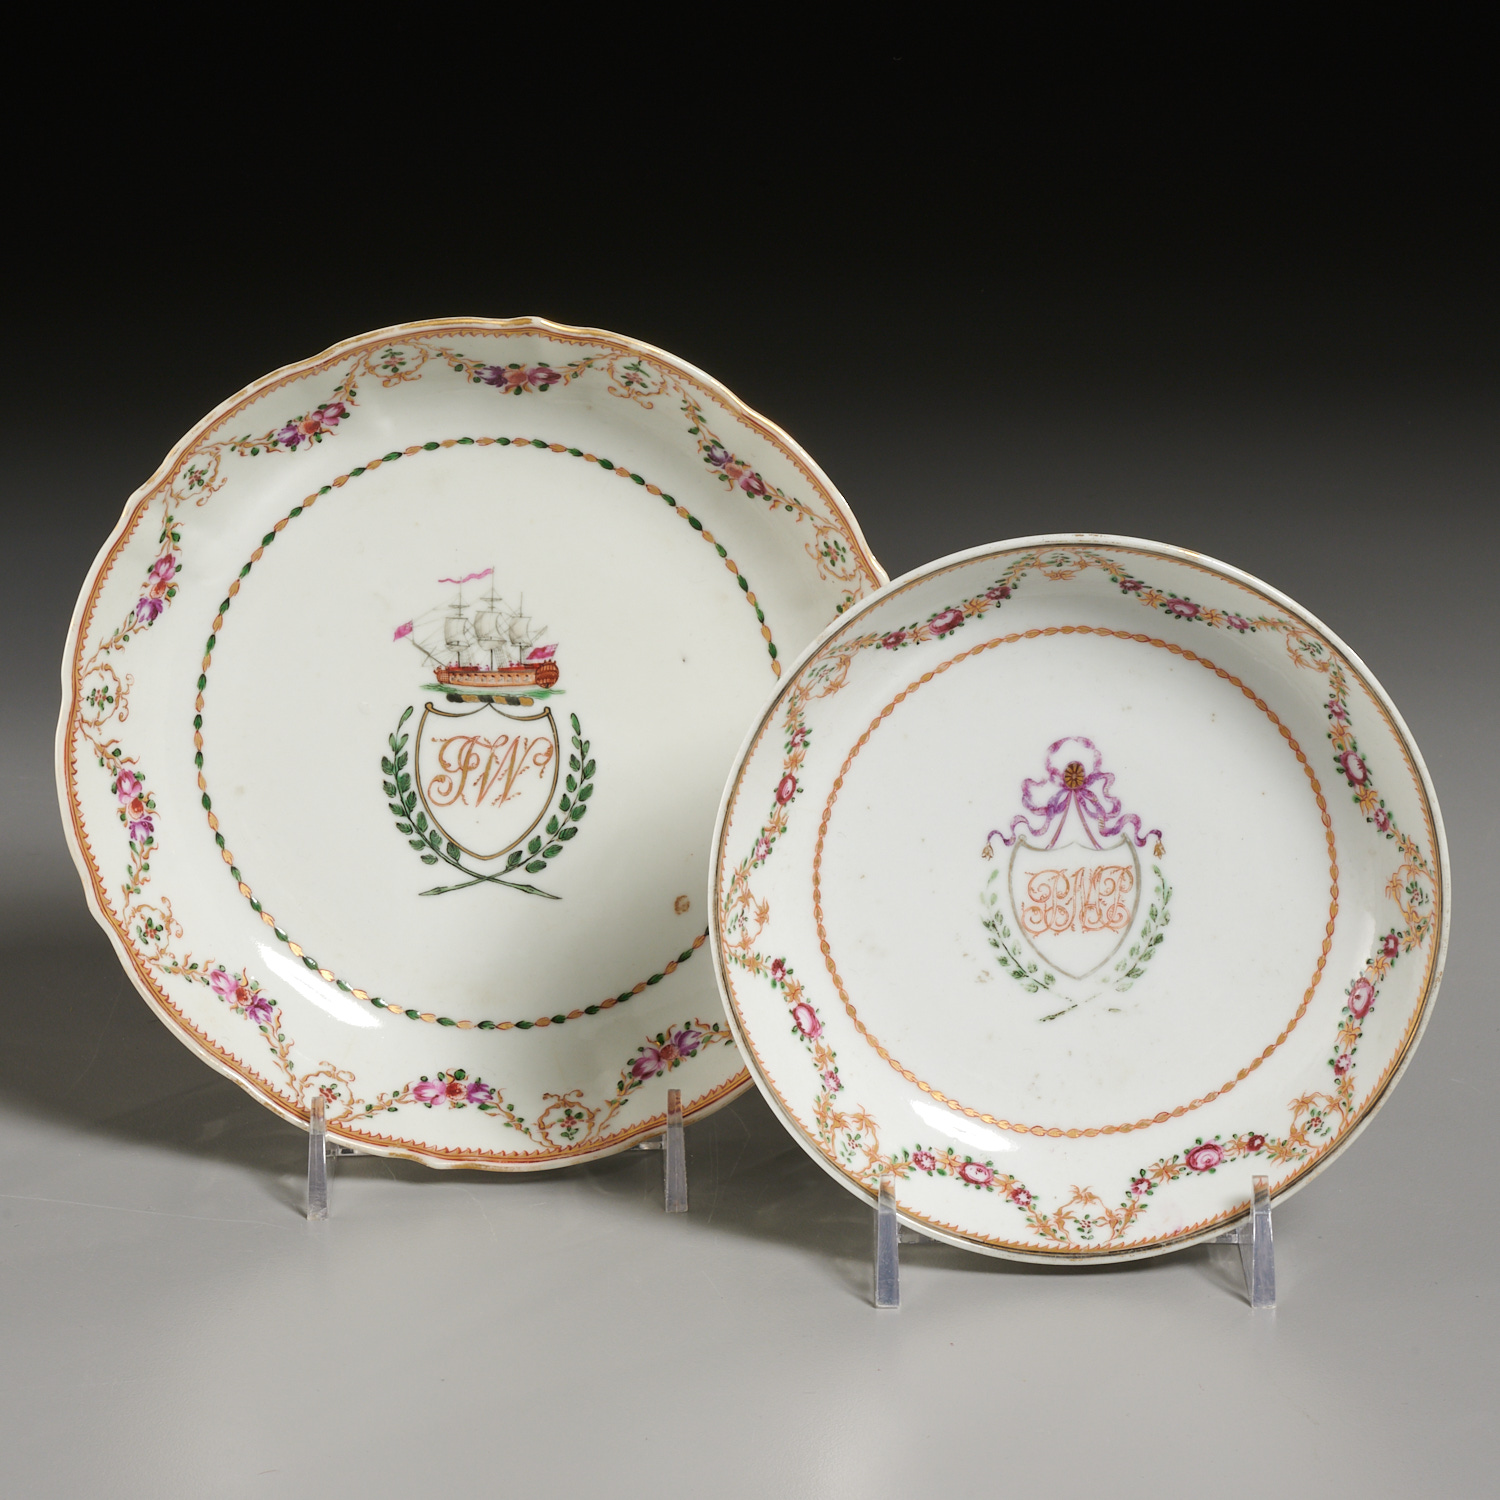 (2) CHINESE EXPORT ARMORIAL PORCELAIN